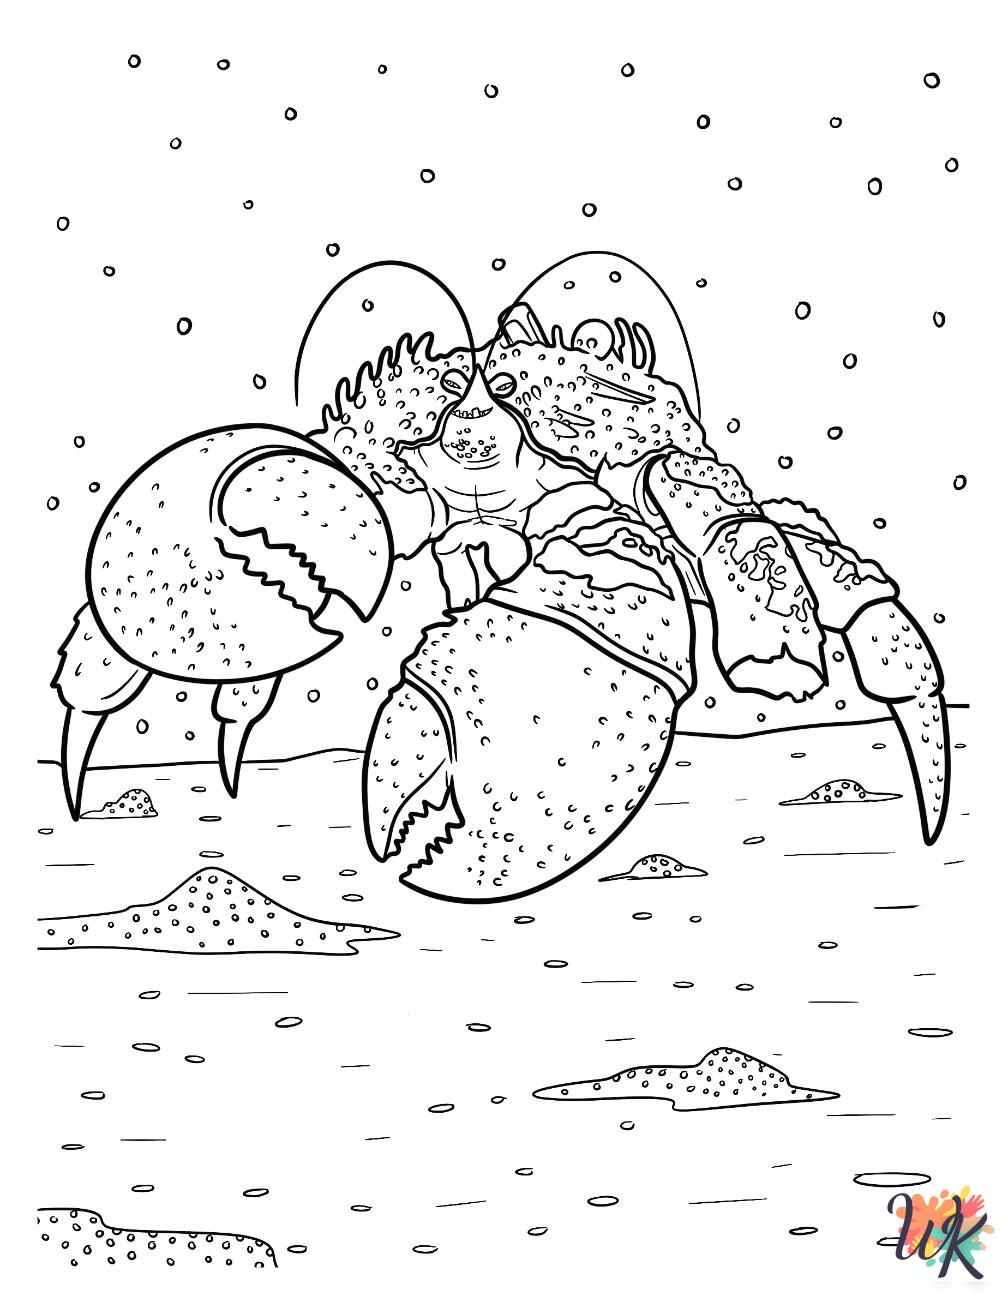 Crab coloring pages grinch